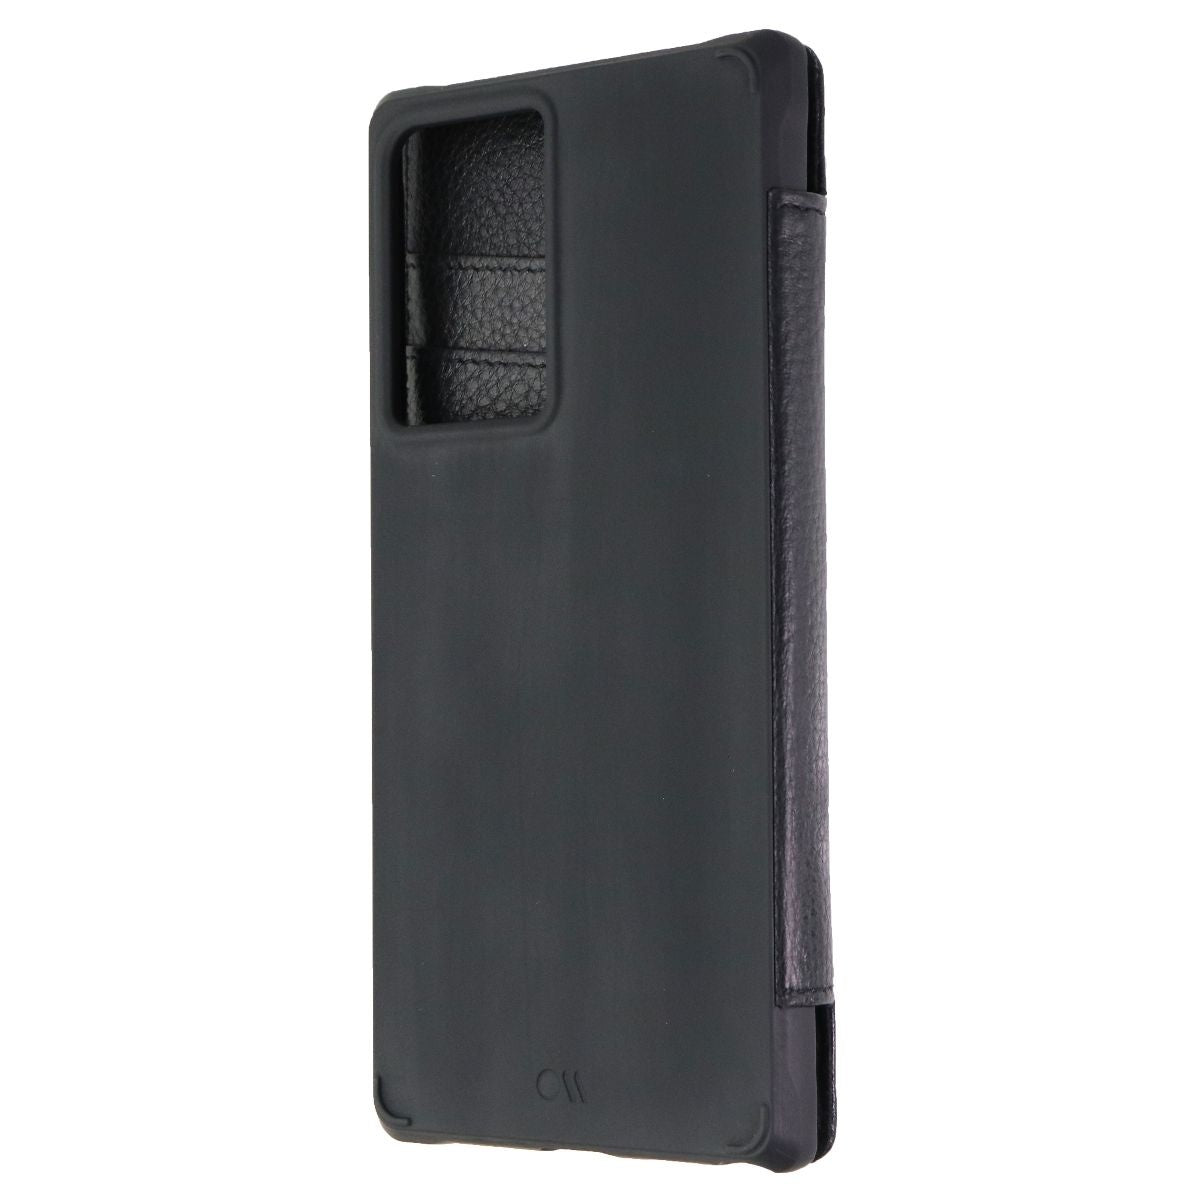 Case-Mate Tough Wallet Folio Case for Samsung Galaxy Note20 Ultra 5G - Black Cell Phone - Cases, Covers & Skins Case-Mate    - Simple Cell Bulk Wholesale Pricing - USA Seller